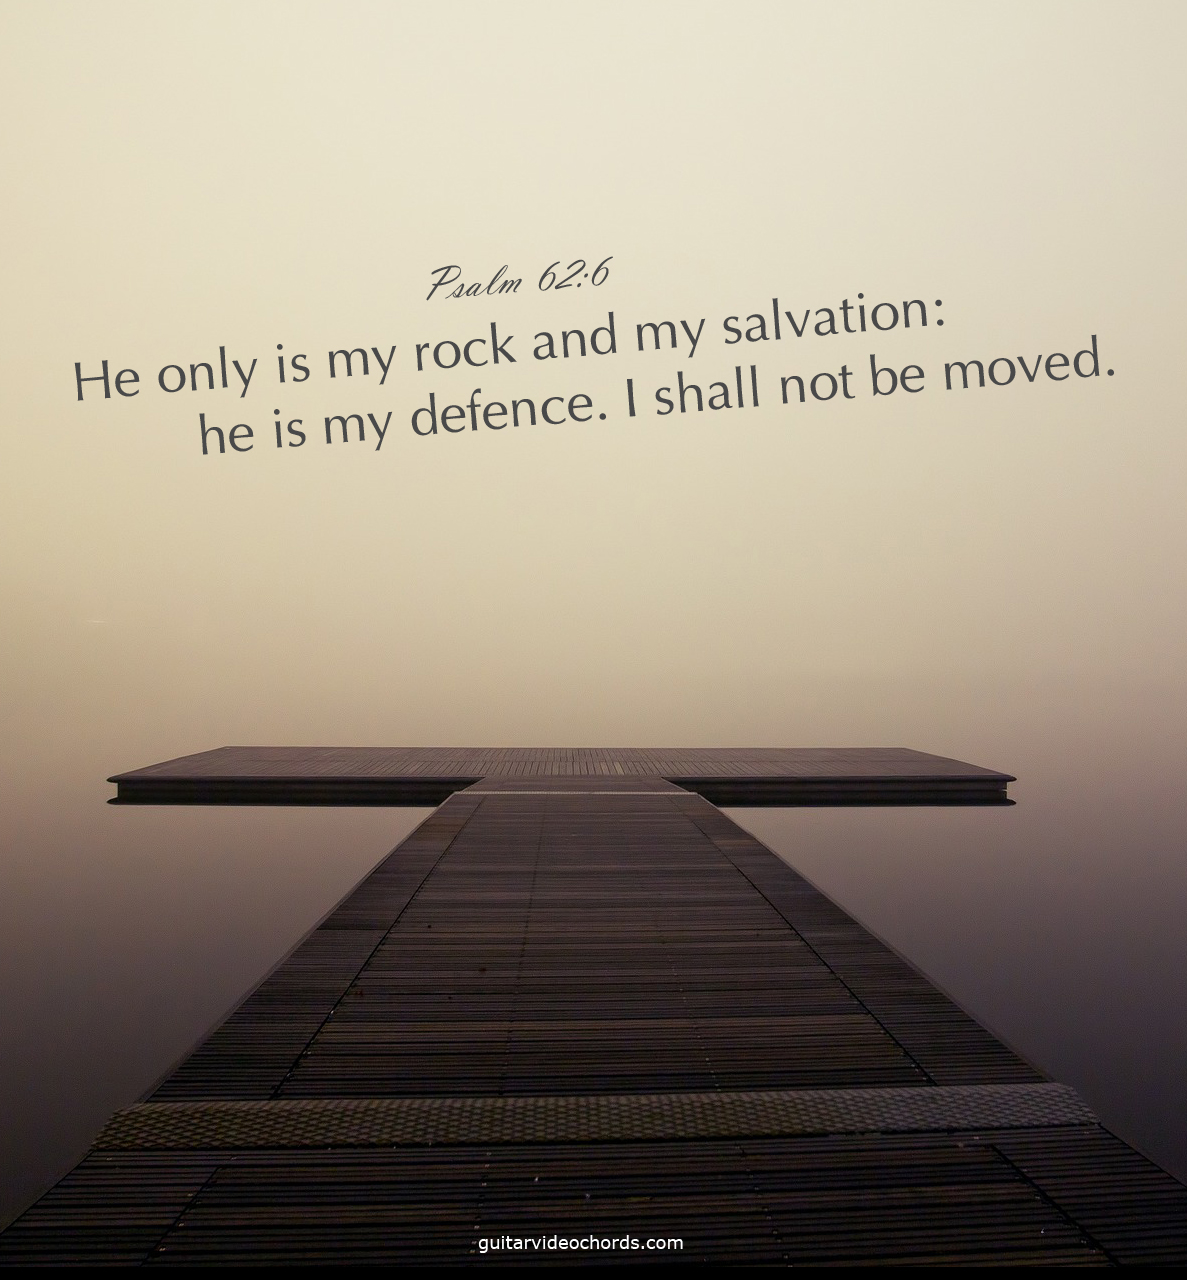 Psalm 62:6 Encouraging Art Pictures, Images, Inspirational, God Quotes